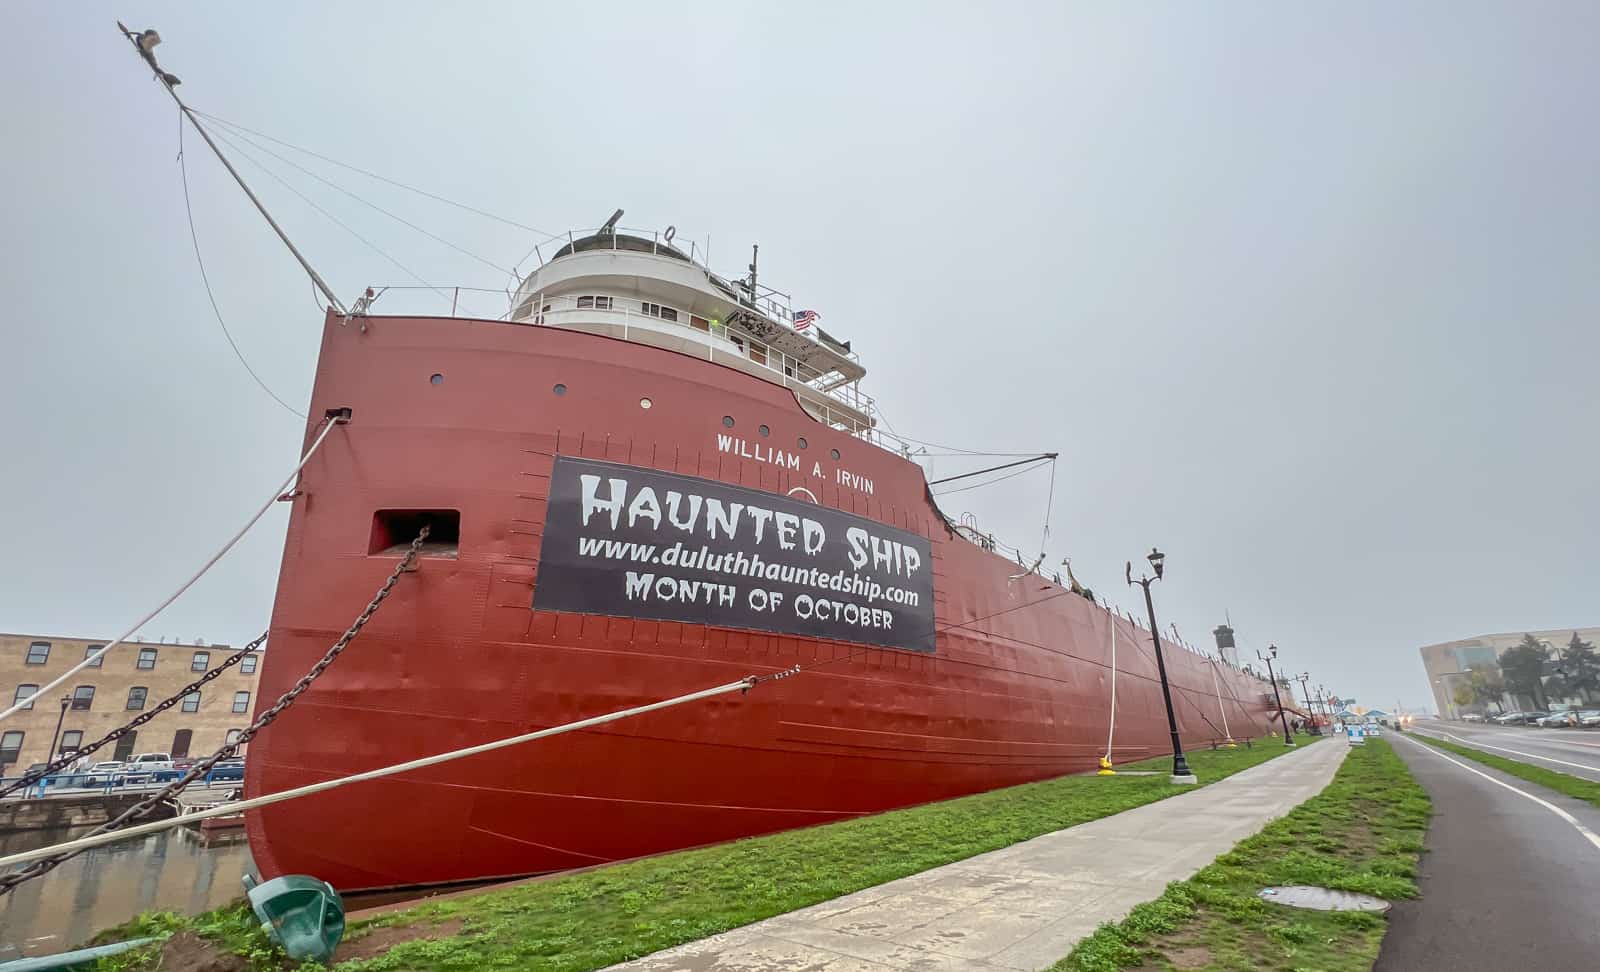 Duluth Haunted Ship Cascade Vacation Rentals